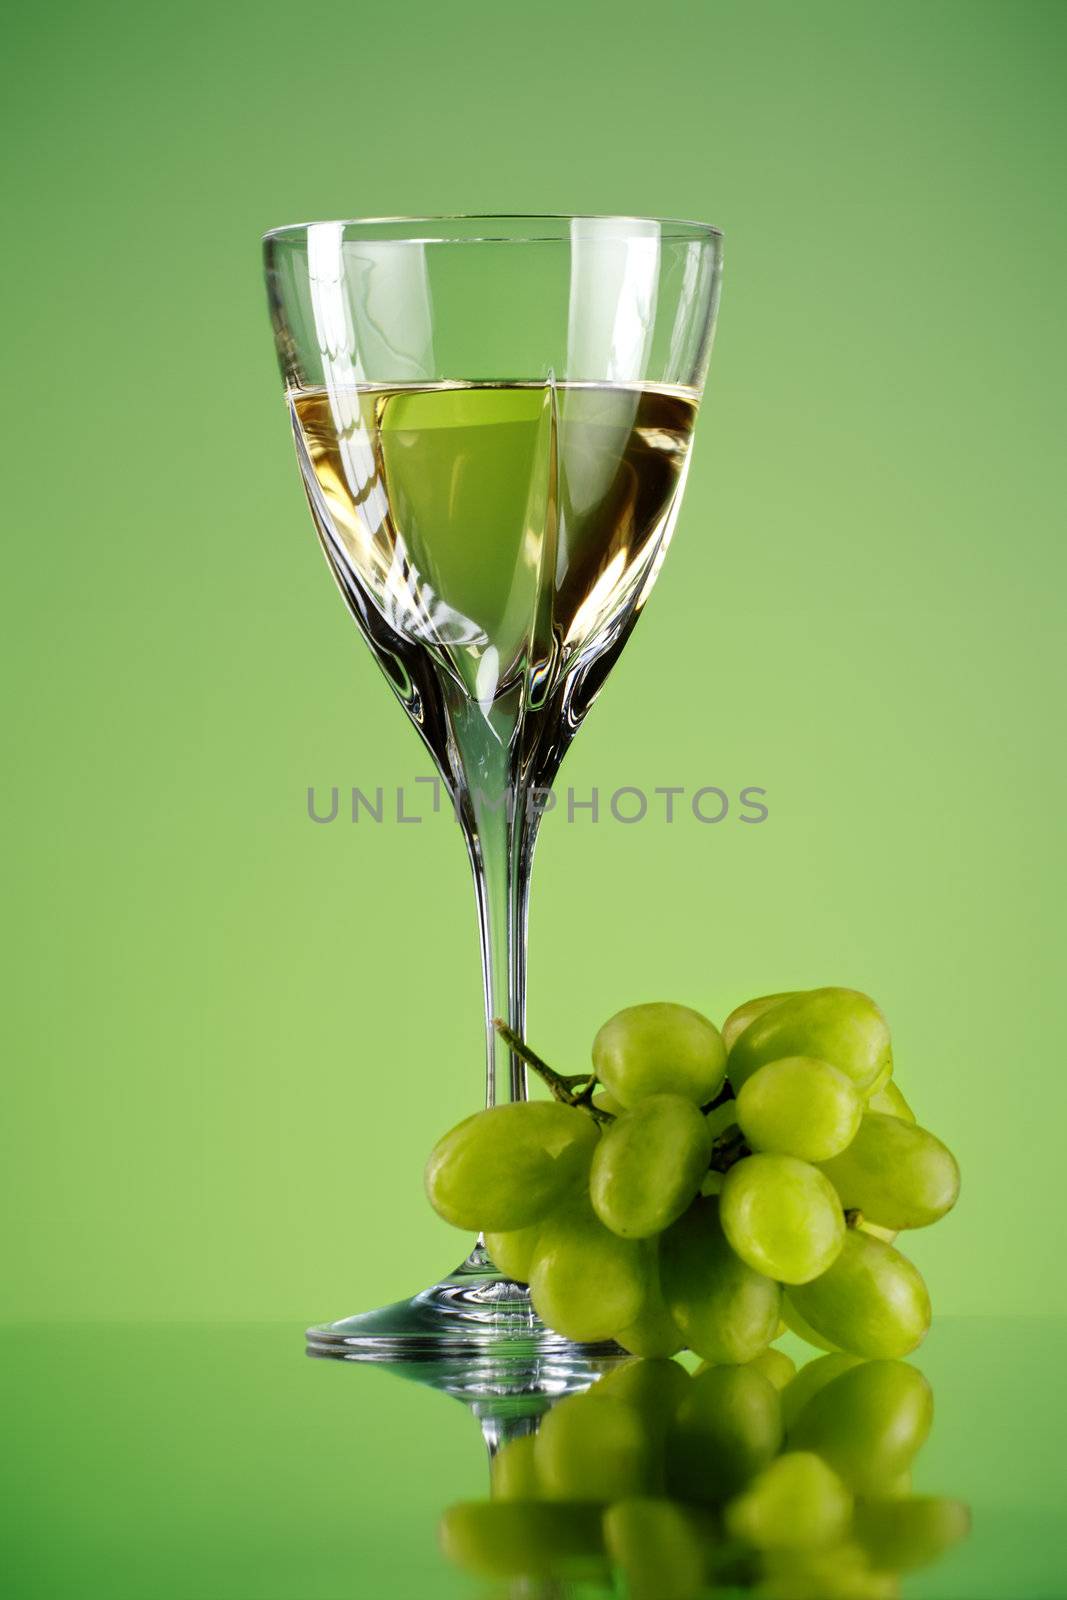 glass of wine and grape bunch, green background